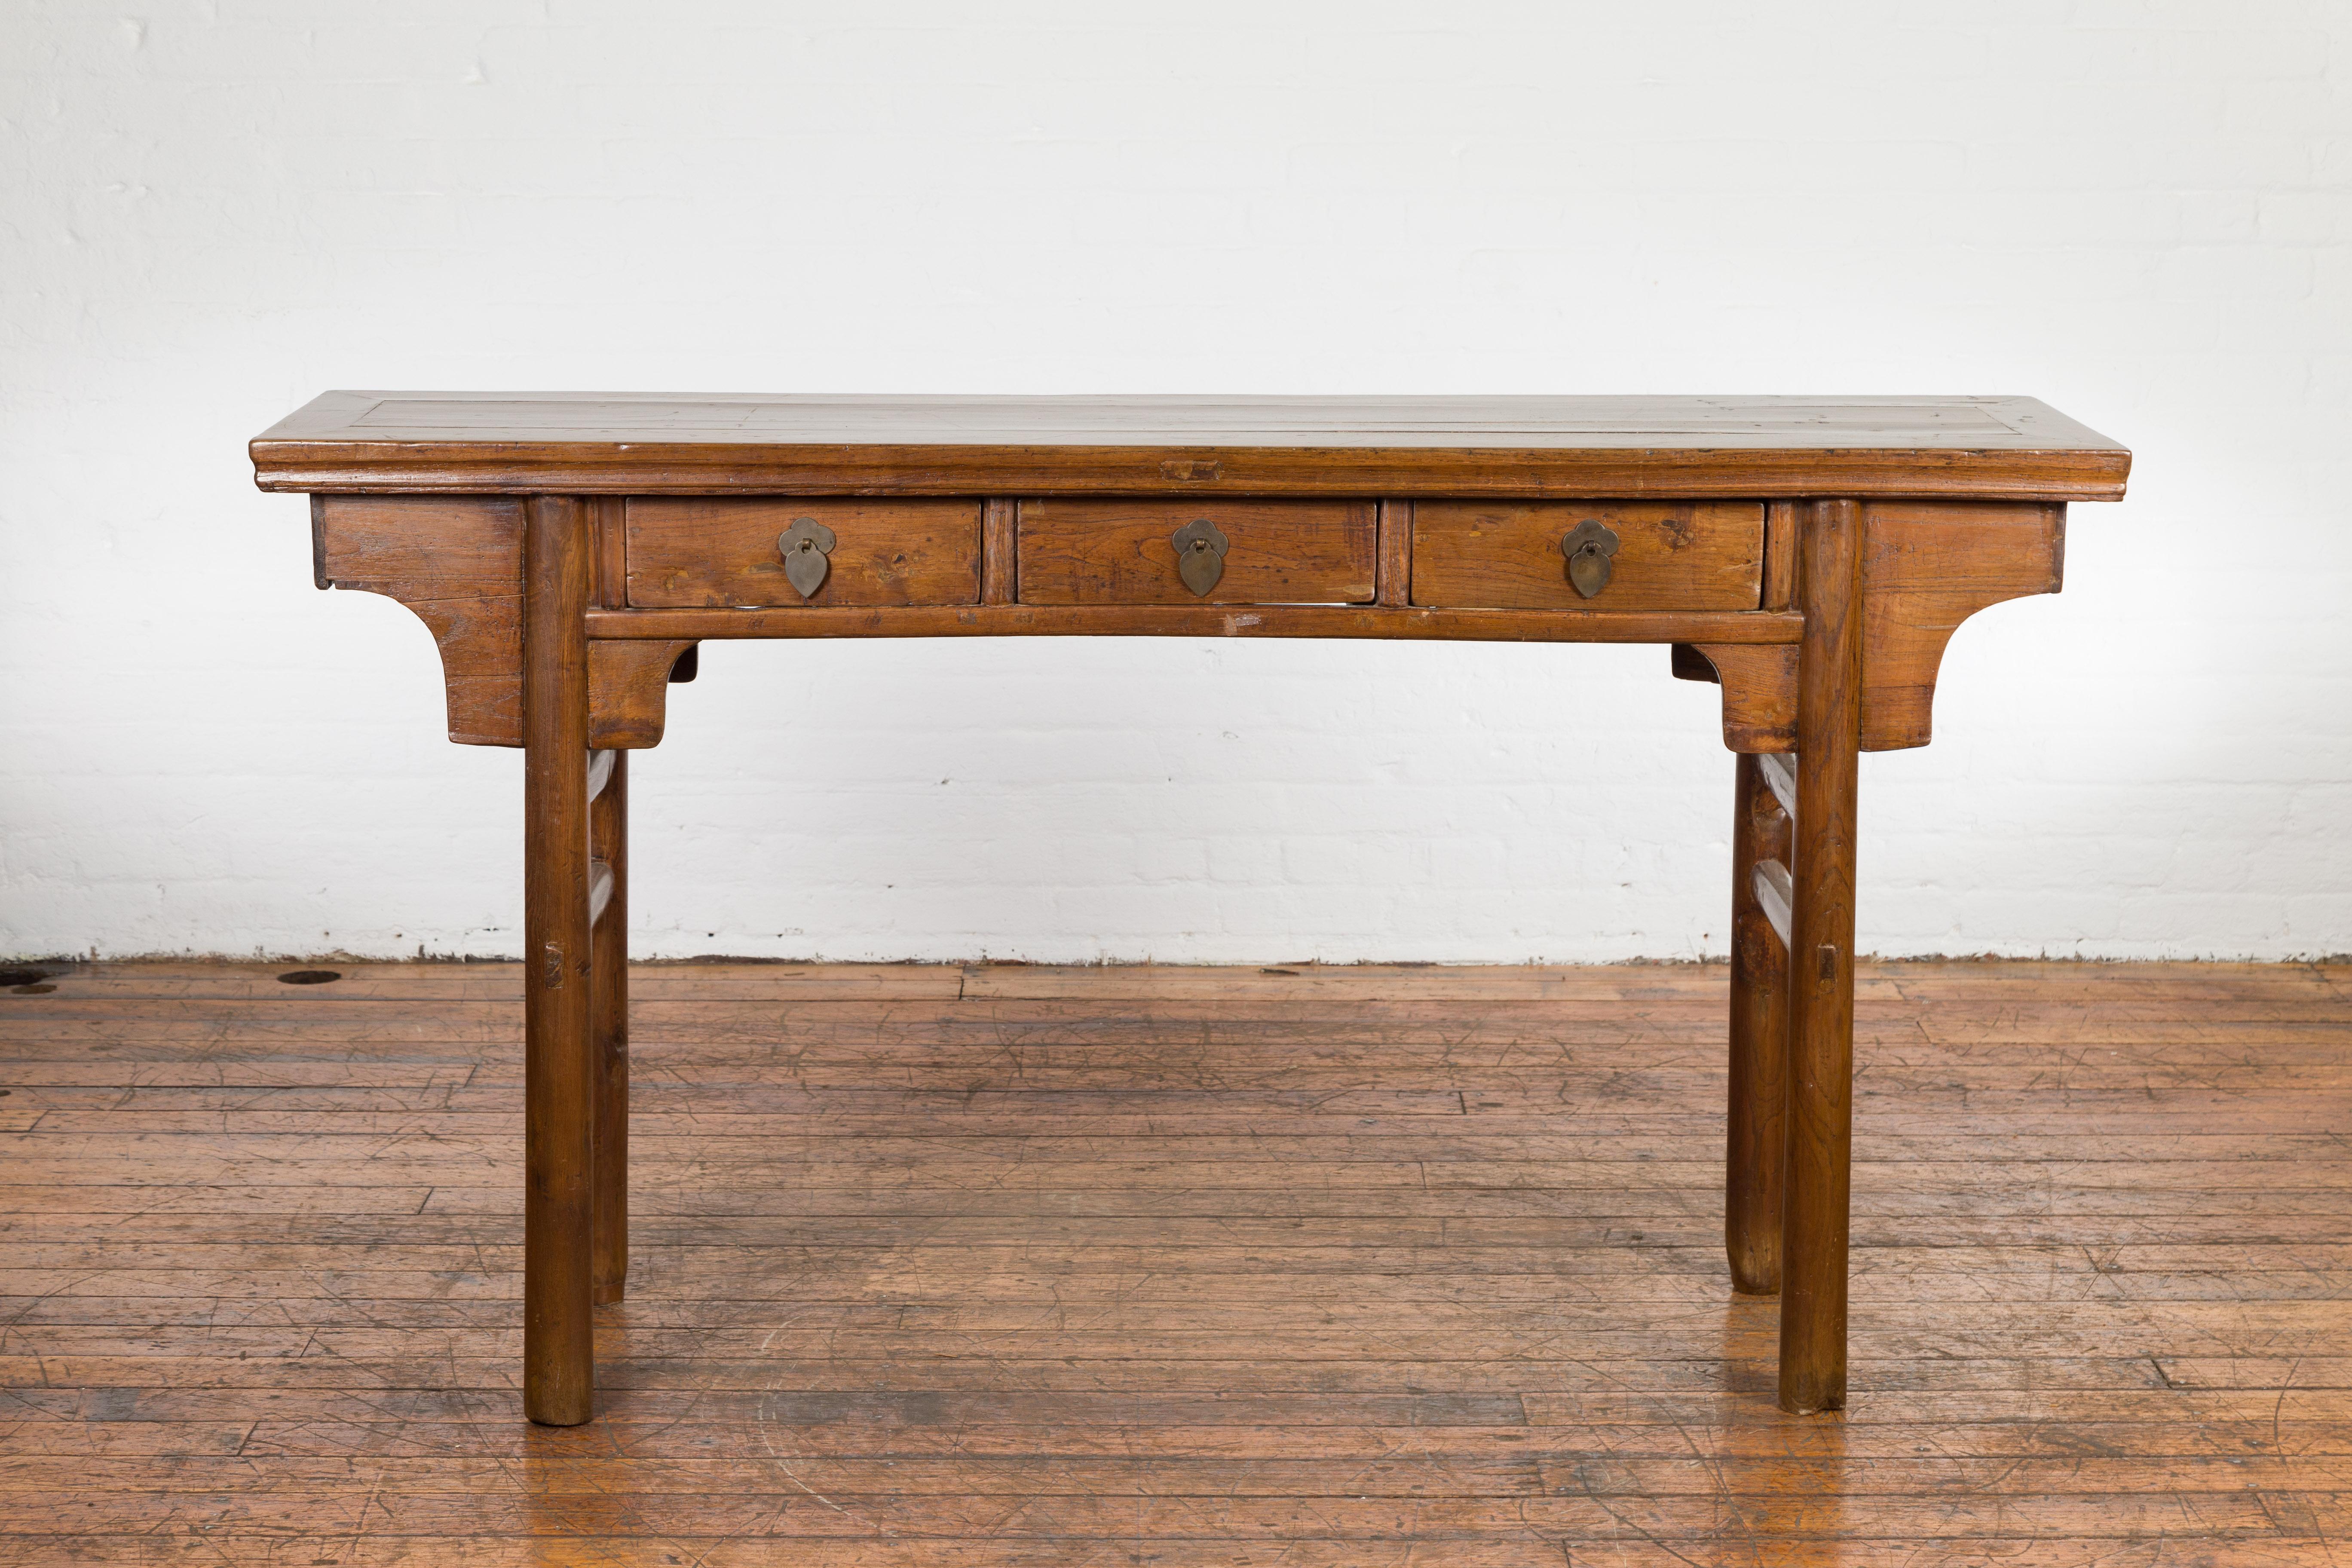 An antique Chinese late Qing Dynasty period wooden altar console table from the early 20th century, with three drawers and side stretchers. Created in China during the early years of the 20th century, this wooden altar console table features a long